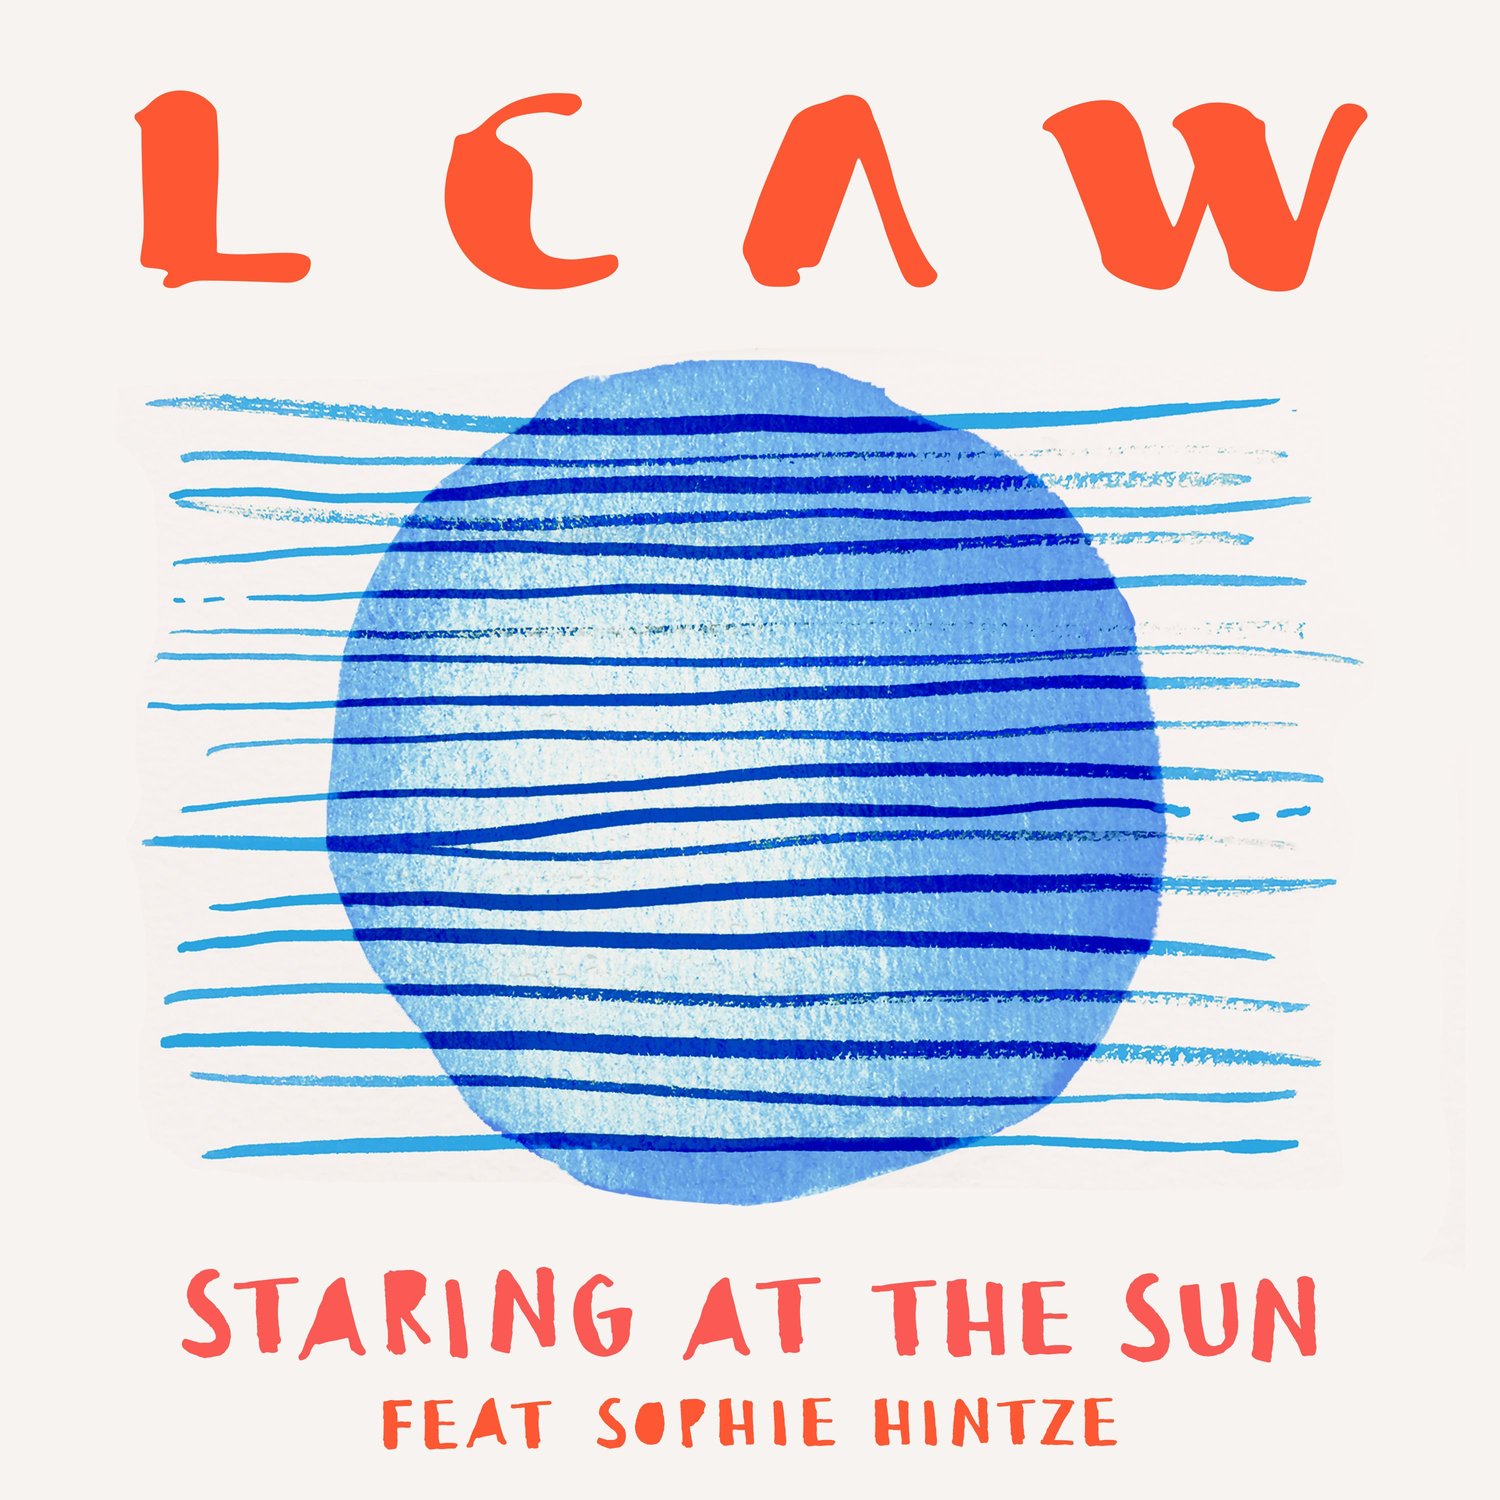 Солнце feat. Staring at the Sun. LCAW. Saint Lane staring at the Sun.